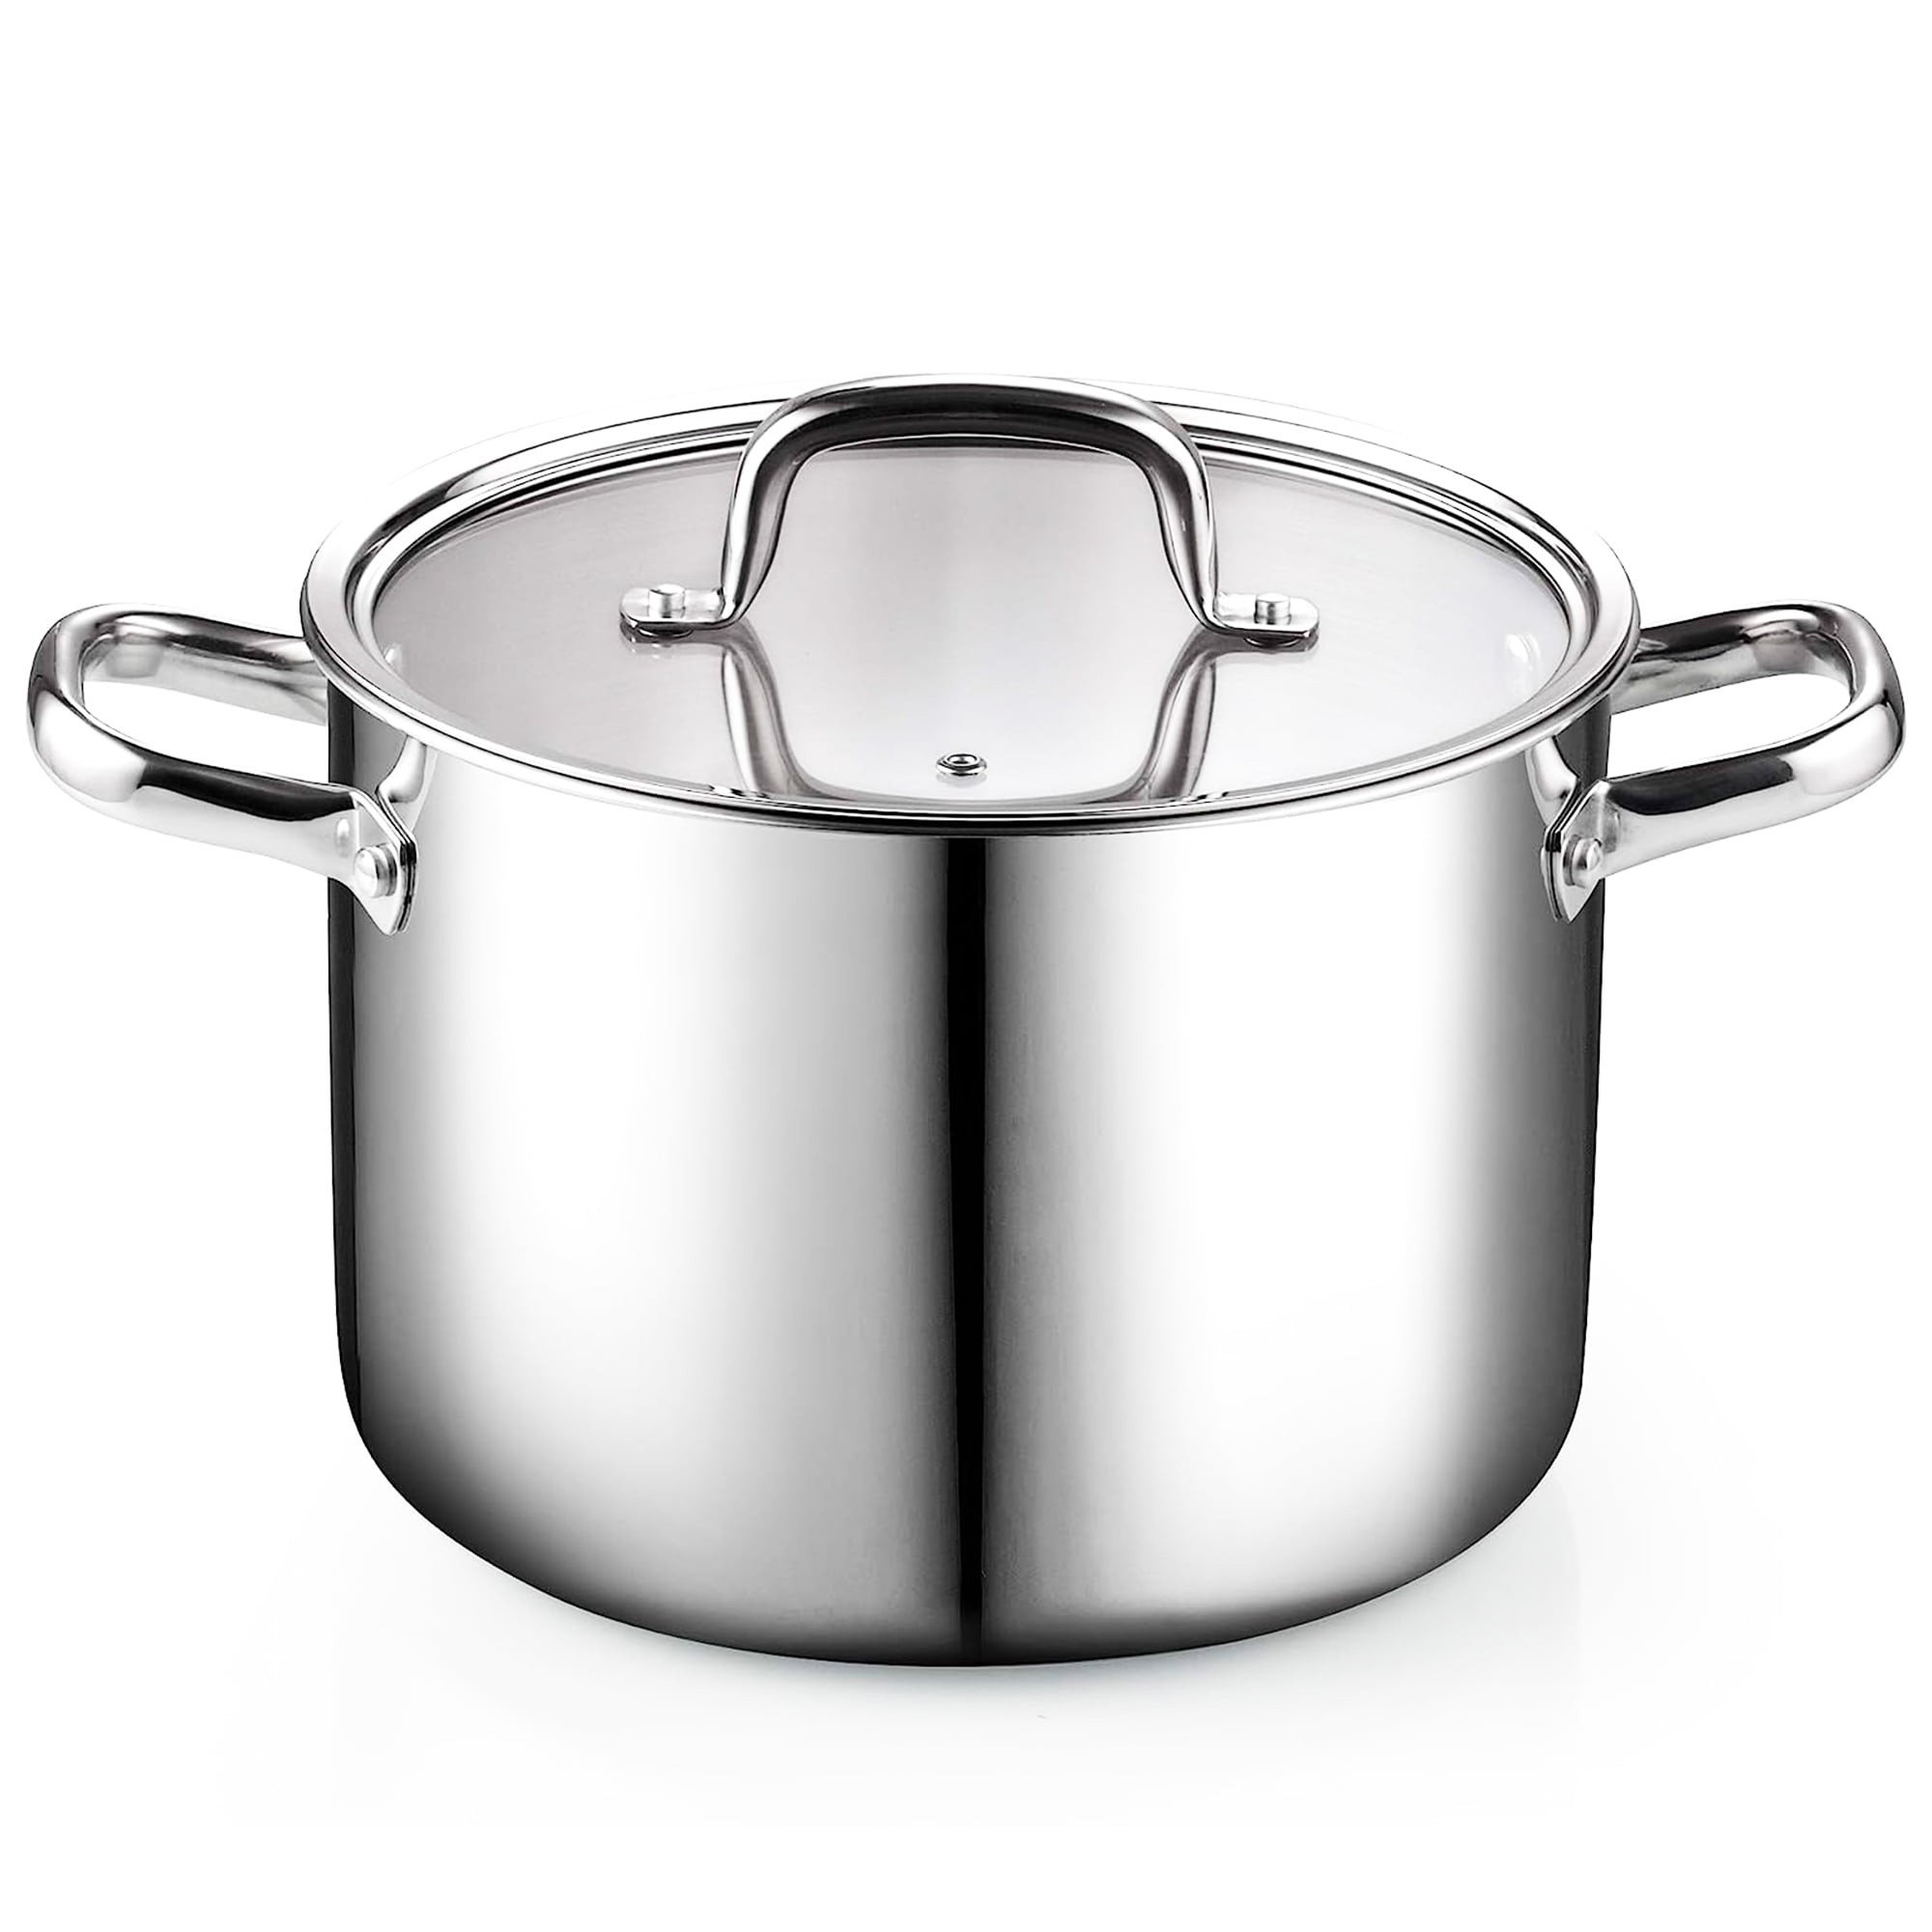 Cook N Home Stainless Steel Stockpot 8 Quart, Tri-Ply Clad Stock Pot with  Glass Lid, Silver 